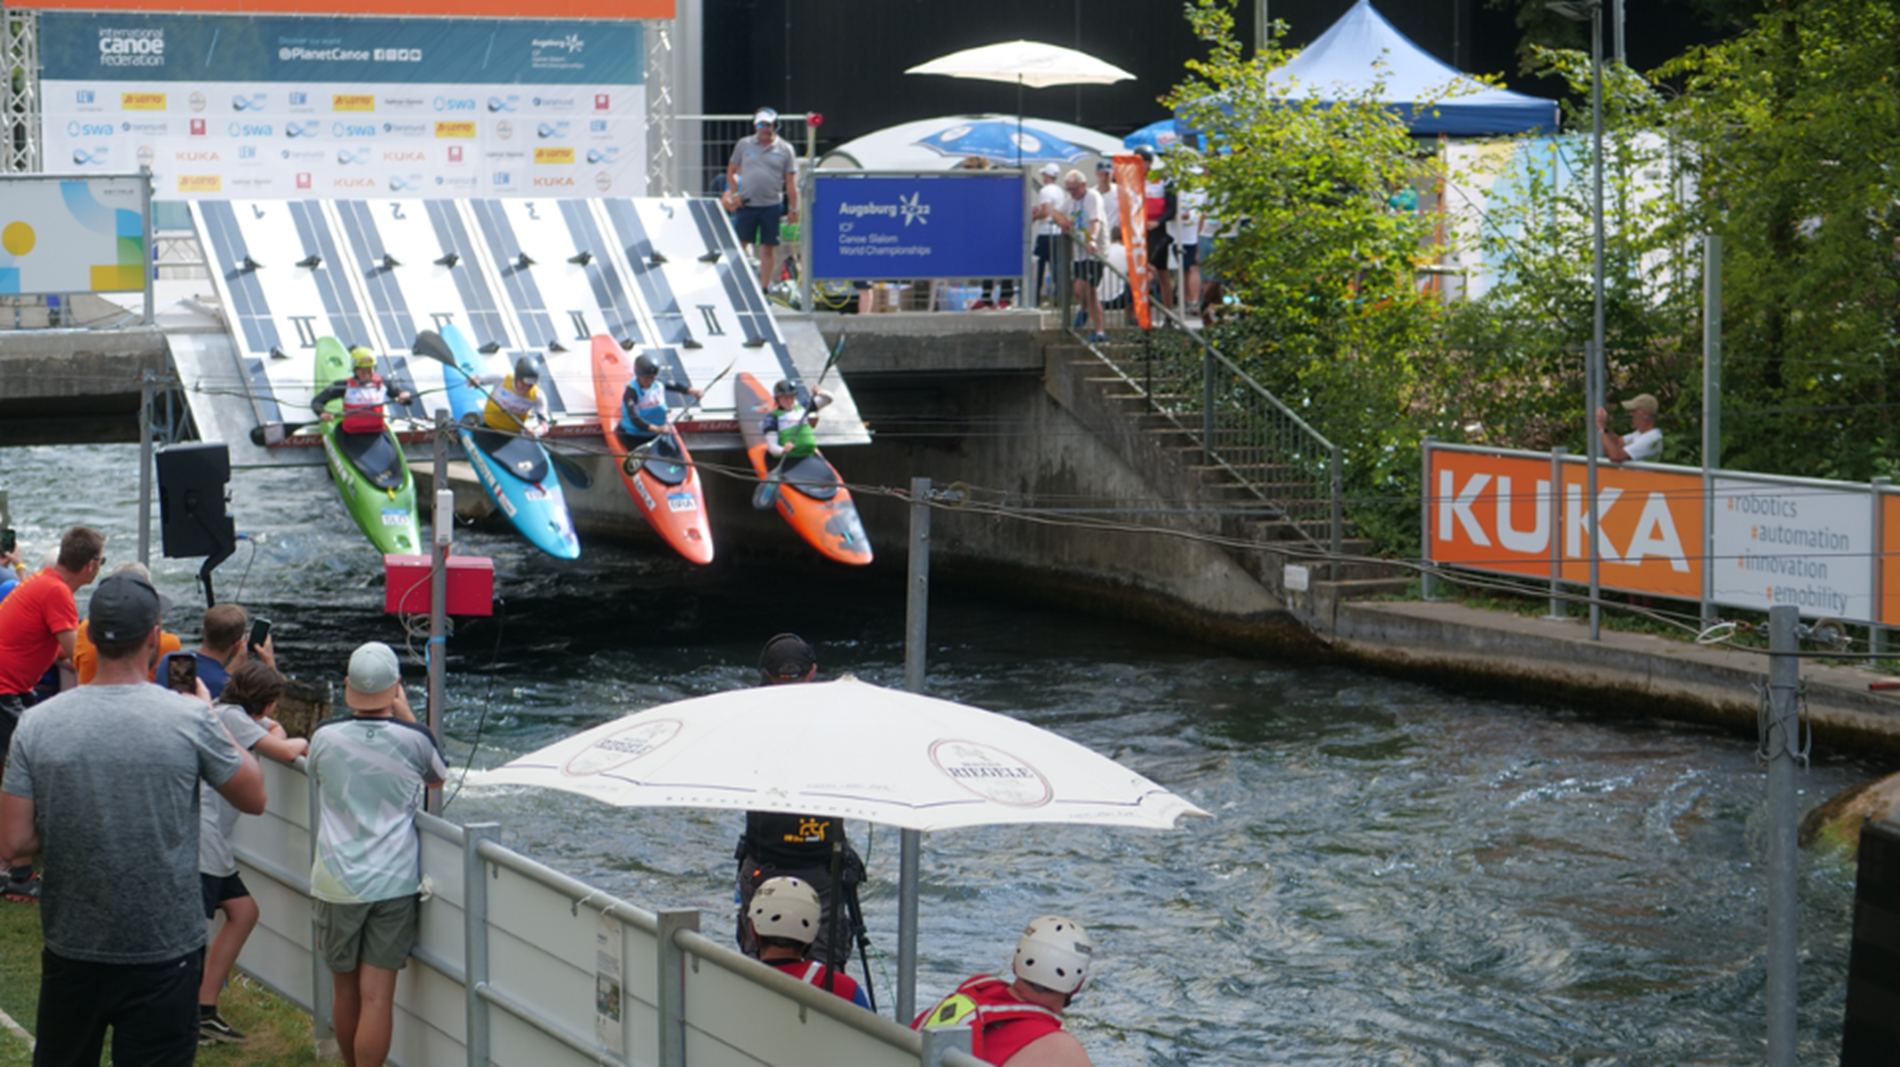 The starting signal for the new discipline: Four canoeists start at Canoe Slalom Extreme, sponsored by KUKA.